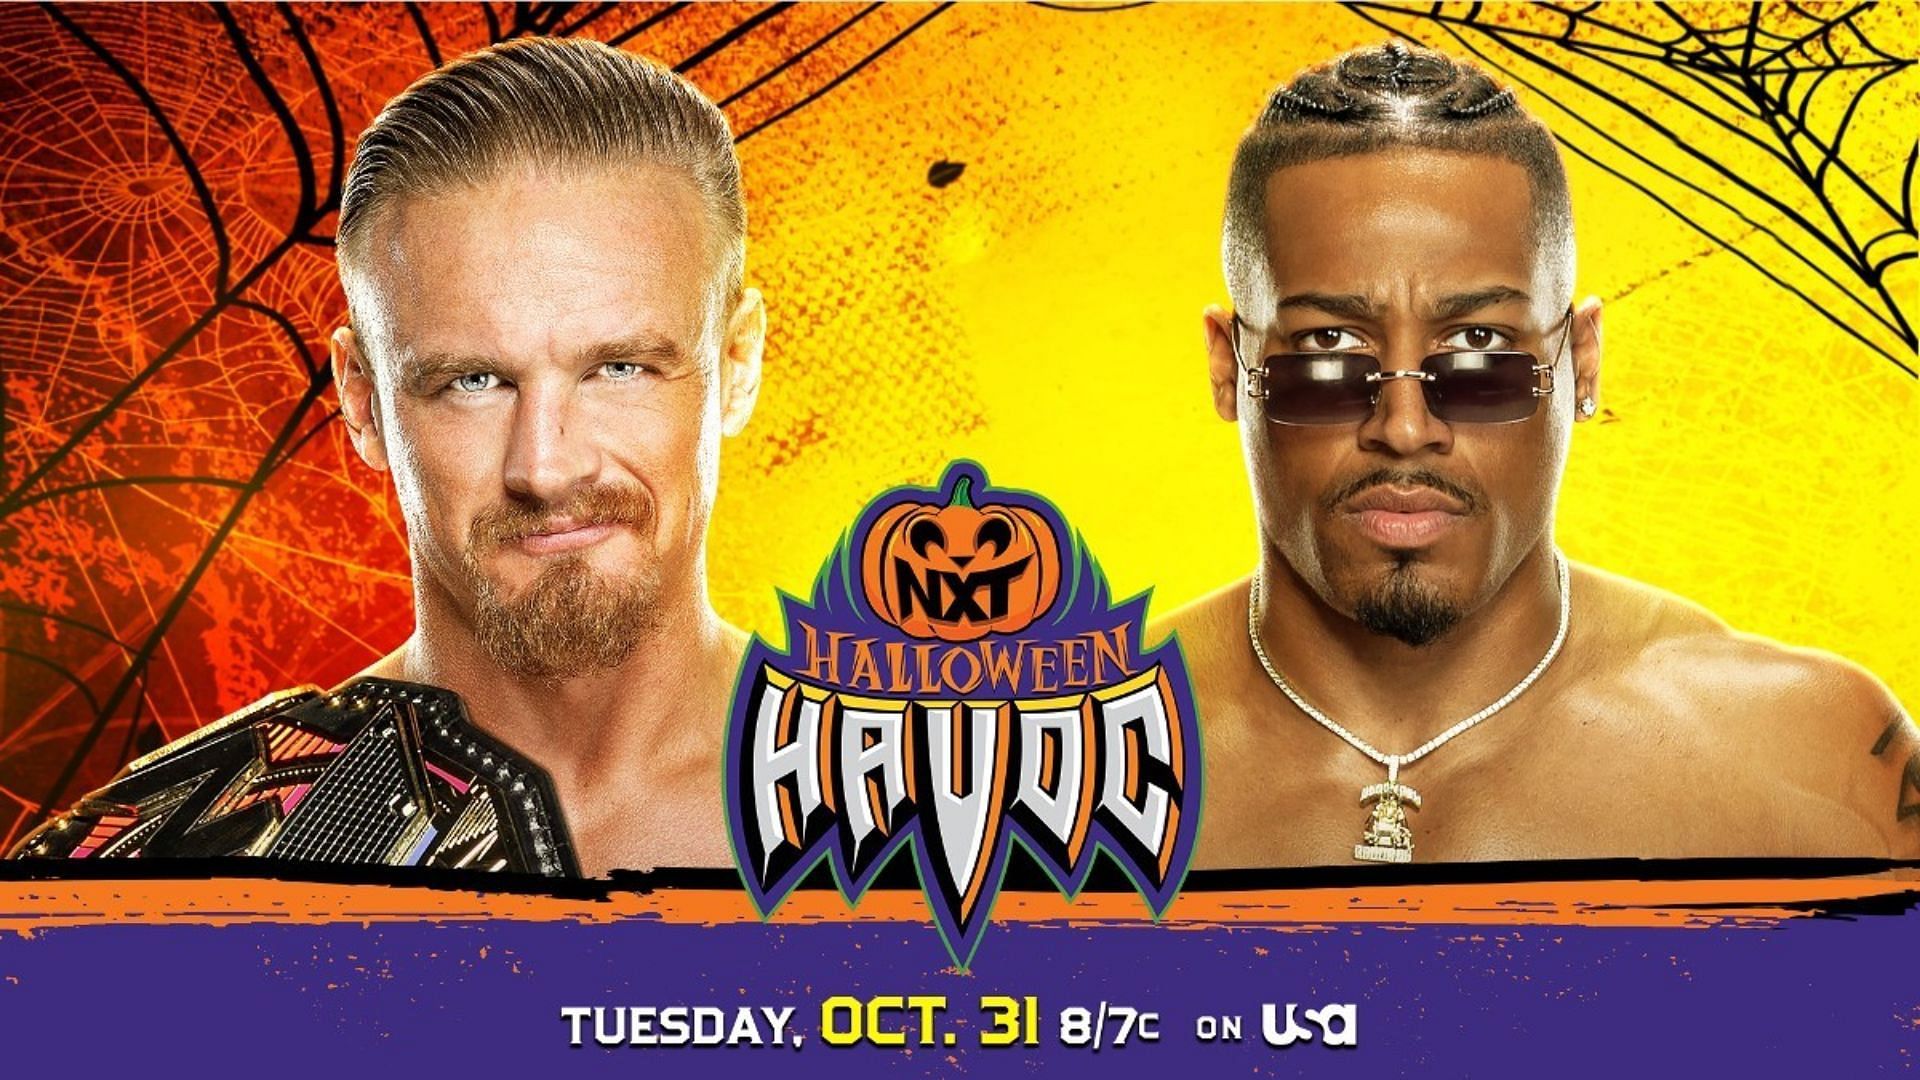 The title match is set for Halloween Havoc